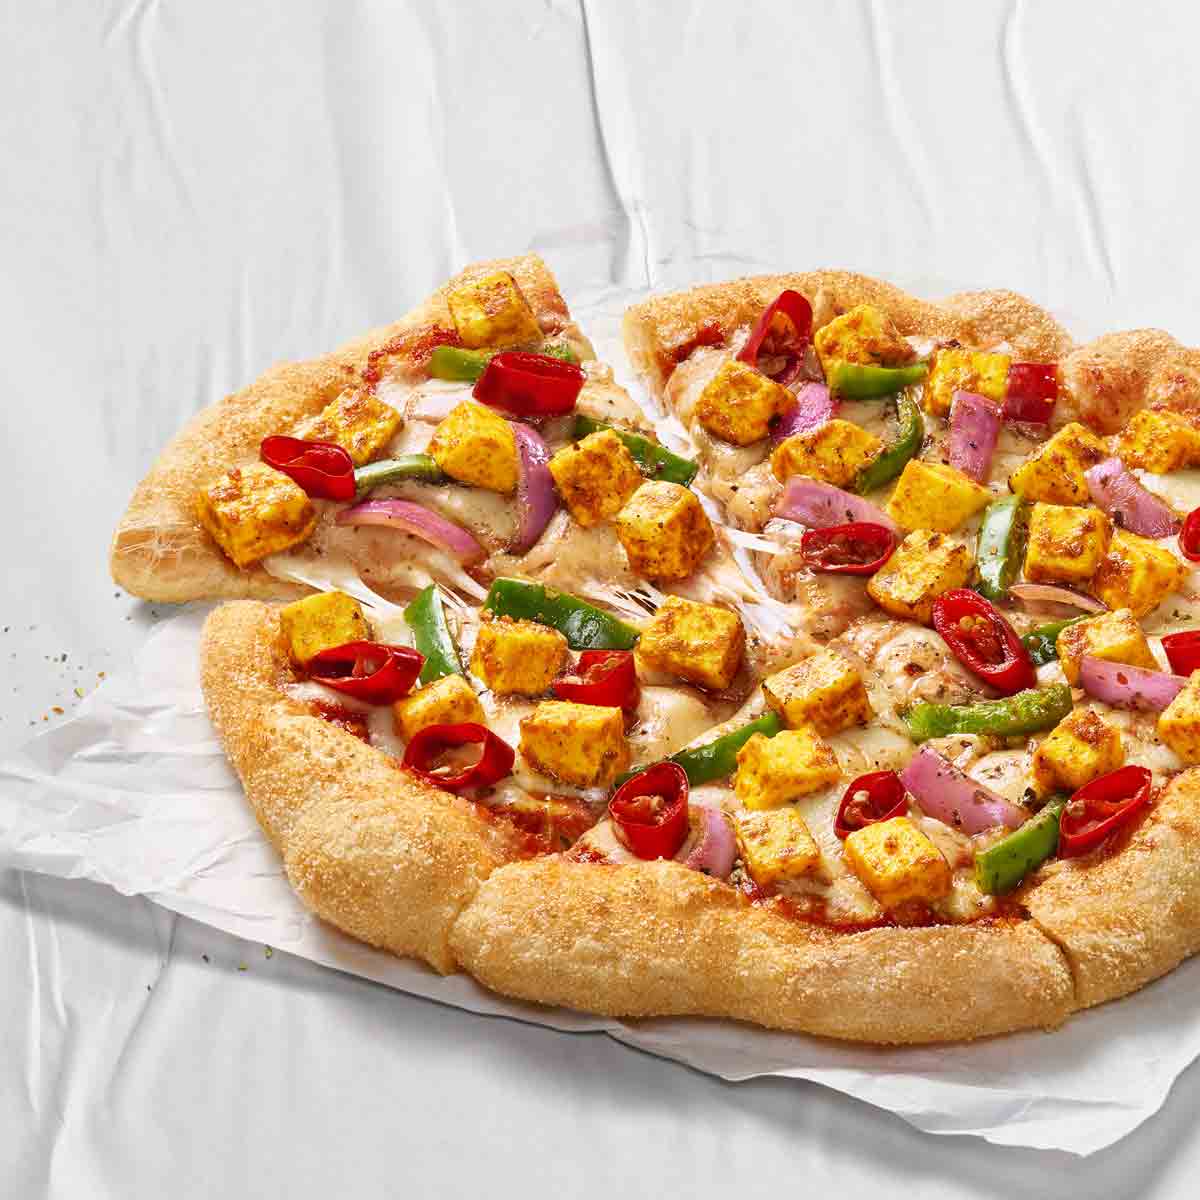 Have you tried Pizza Hut’s new lighter, crispier San Francisco style pizza?